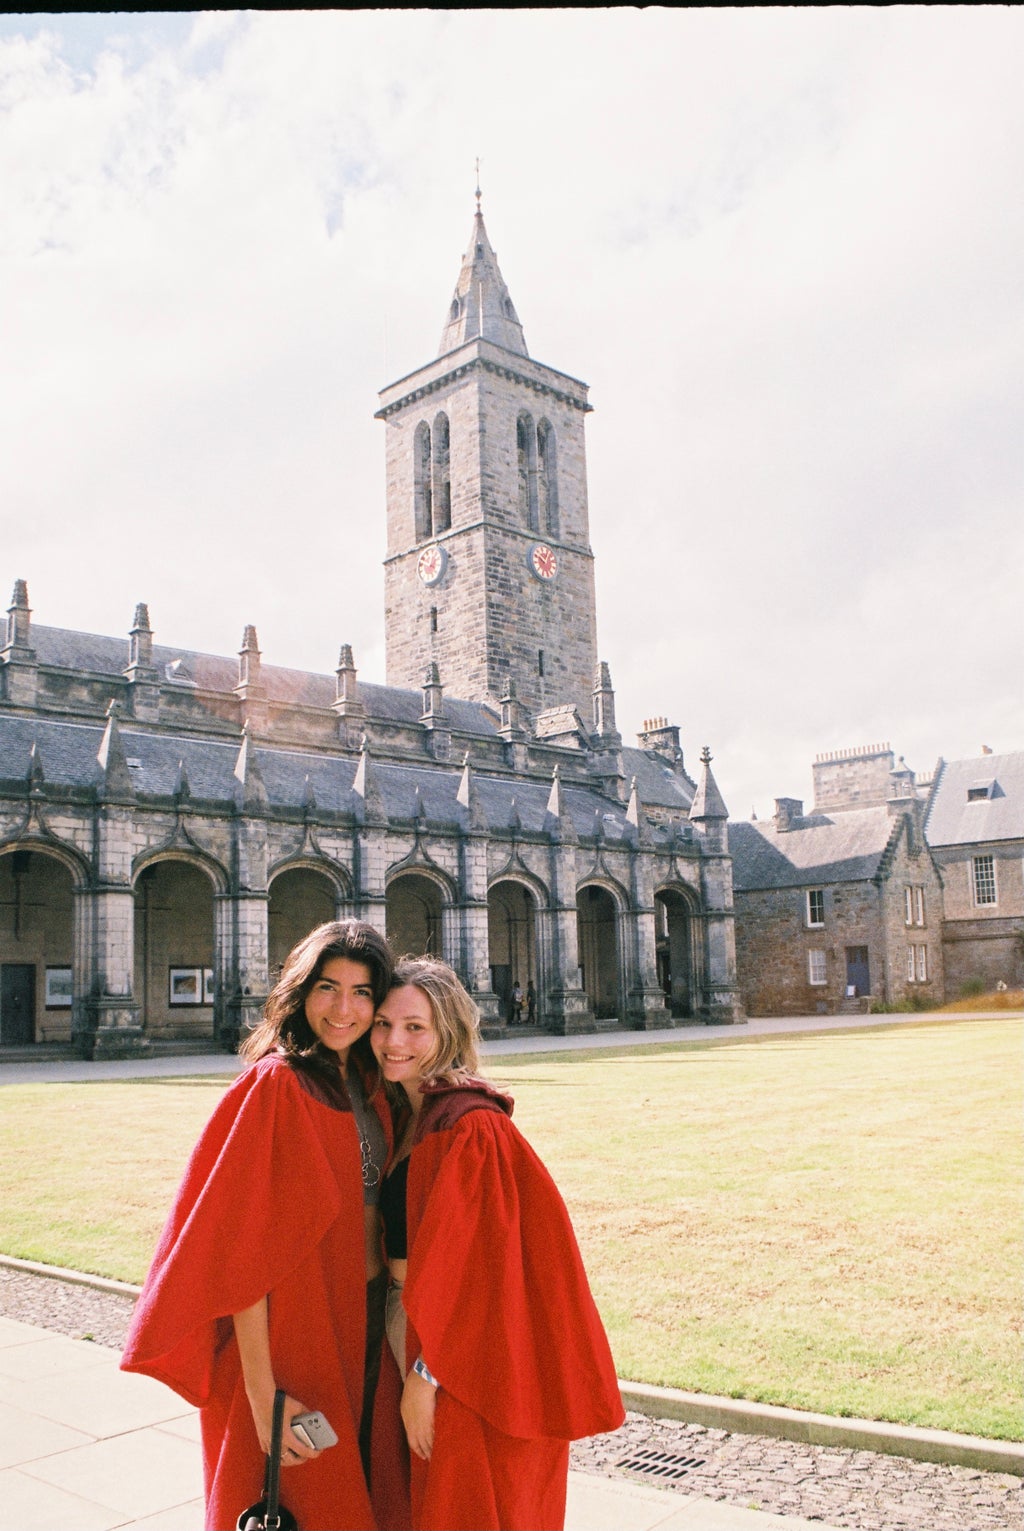 Girls in red cloaks outside a clock tower